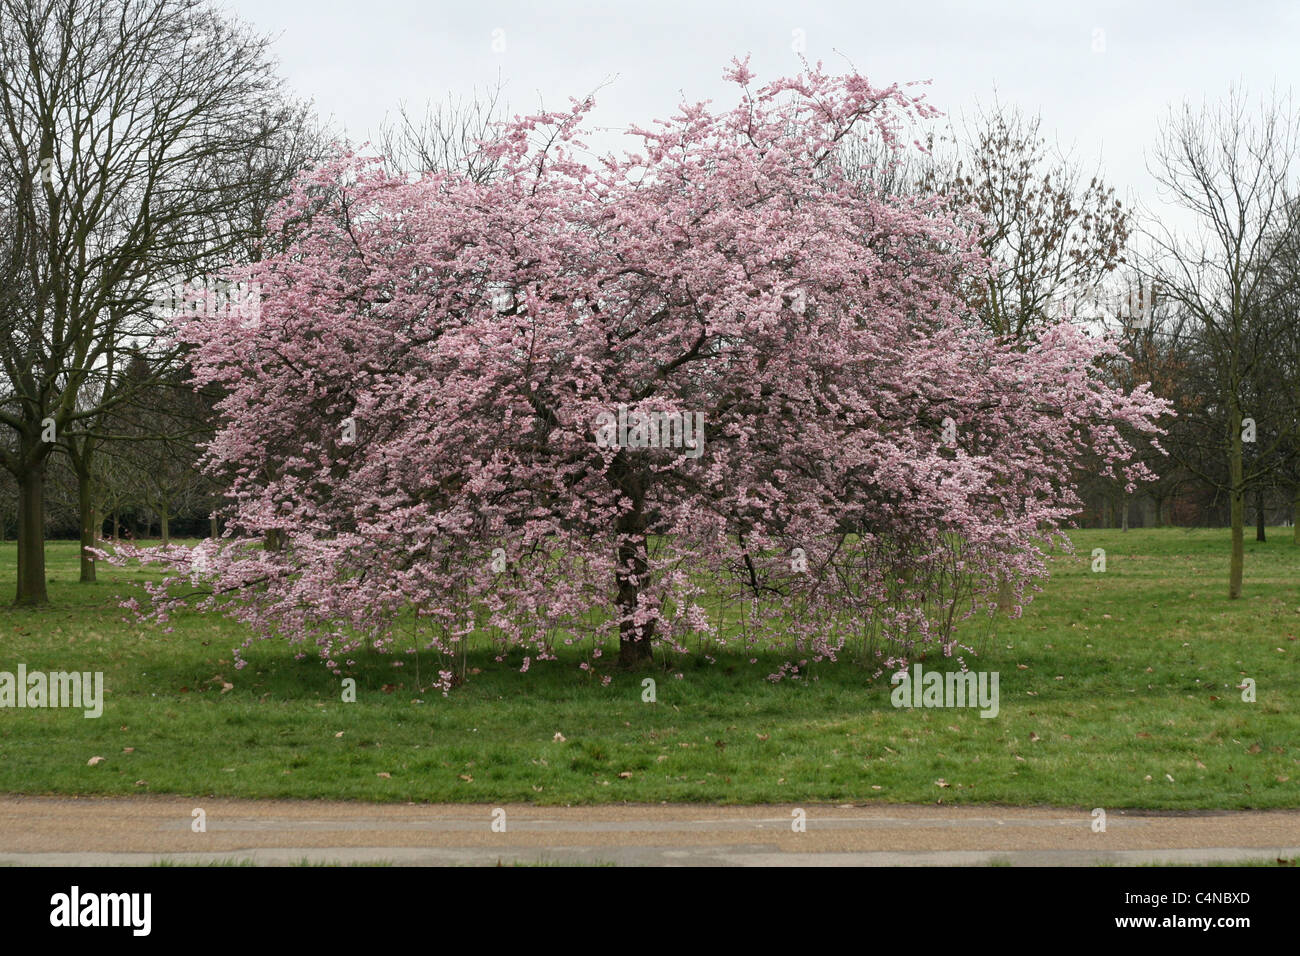 right after the tsunami hit Japan, we found this cherry tree in blossom in kensington gardens, london. Stock Photo